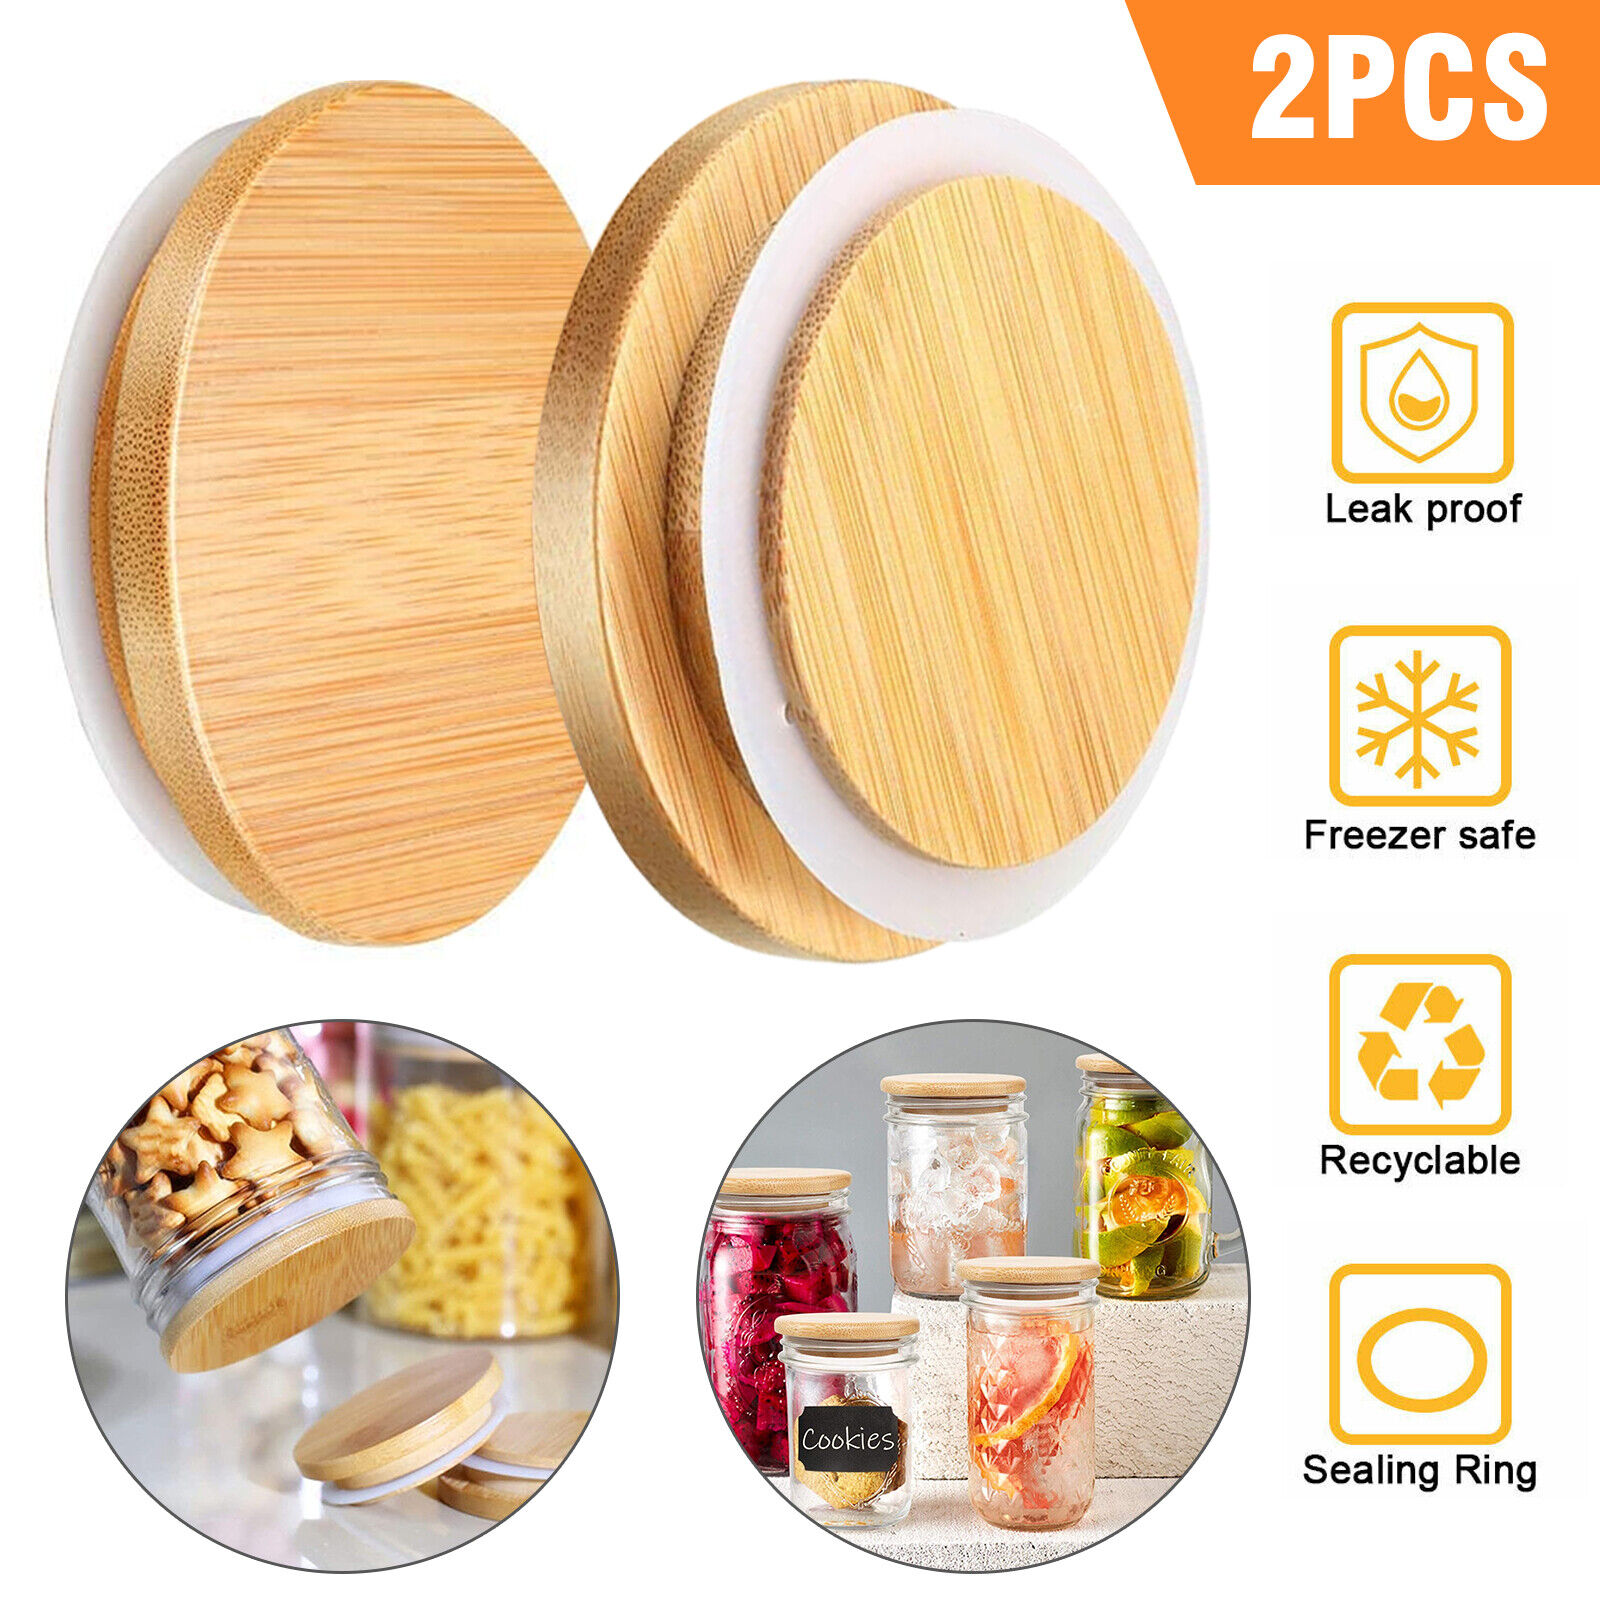 Great Choice Products 2 Pcs Bamboo Jar Lids Sealed Storage Cover For Regular Wide Mouth Mason Canning